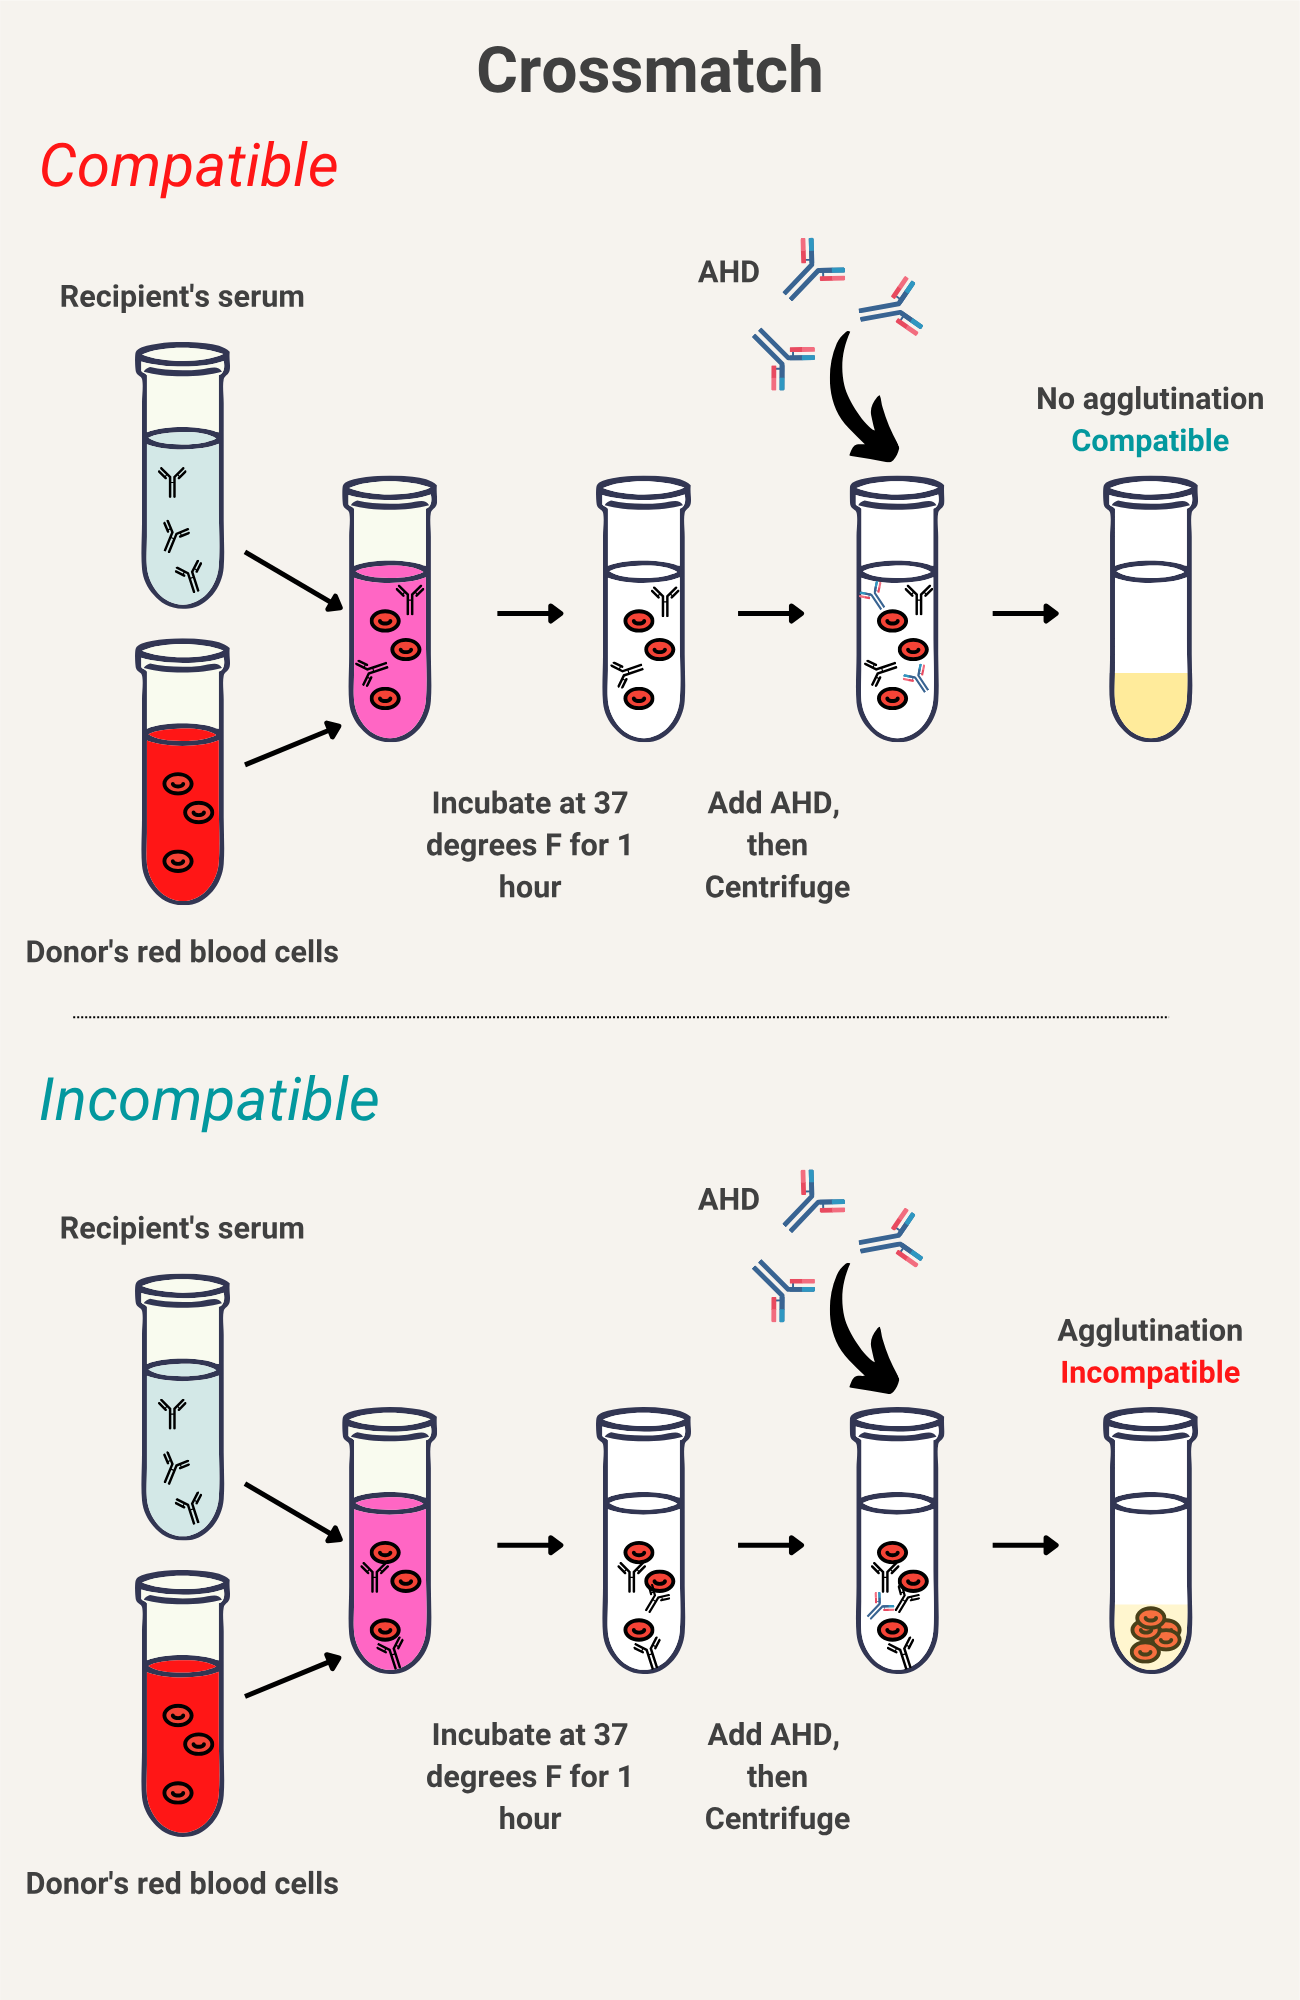 <p>An antibody detection test that <strong>establishes the compatibilty of a donor’s and recipient’s blood</strong></p>